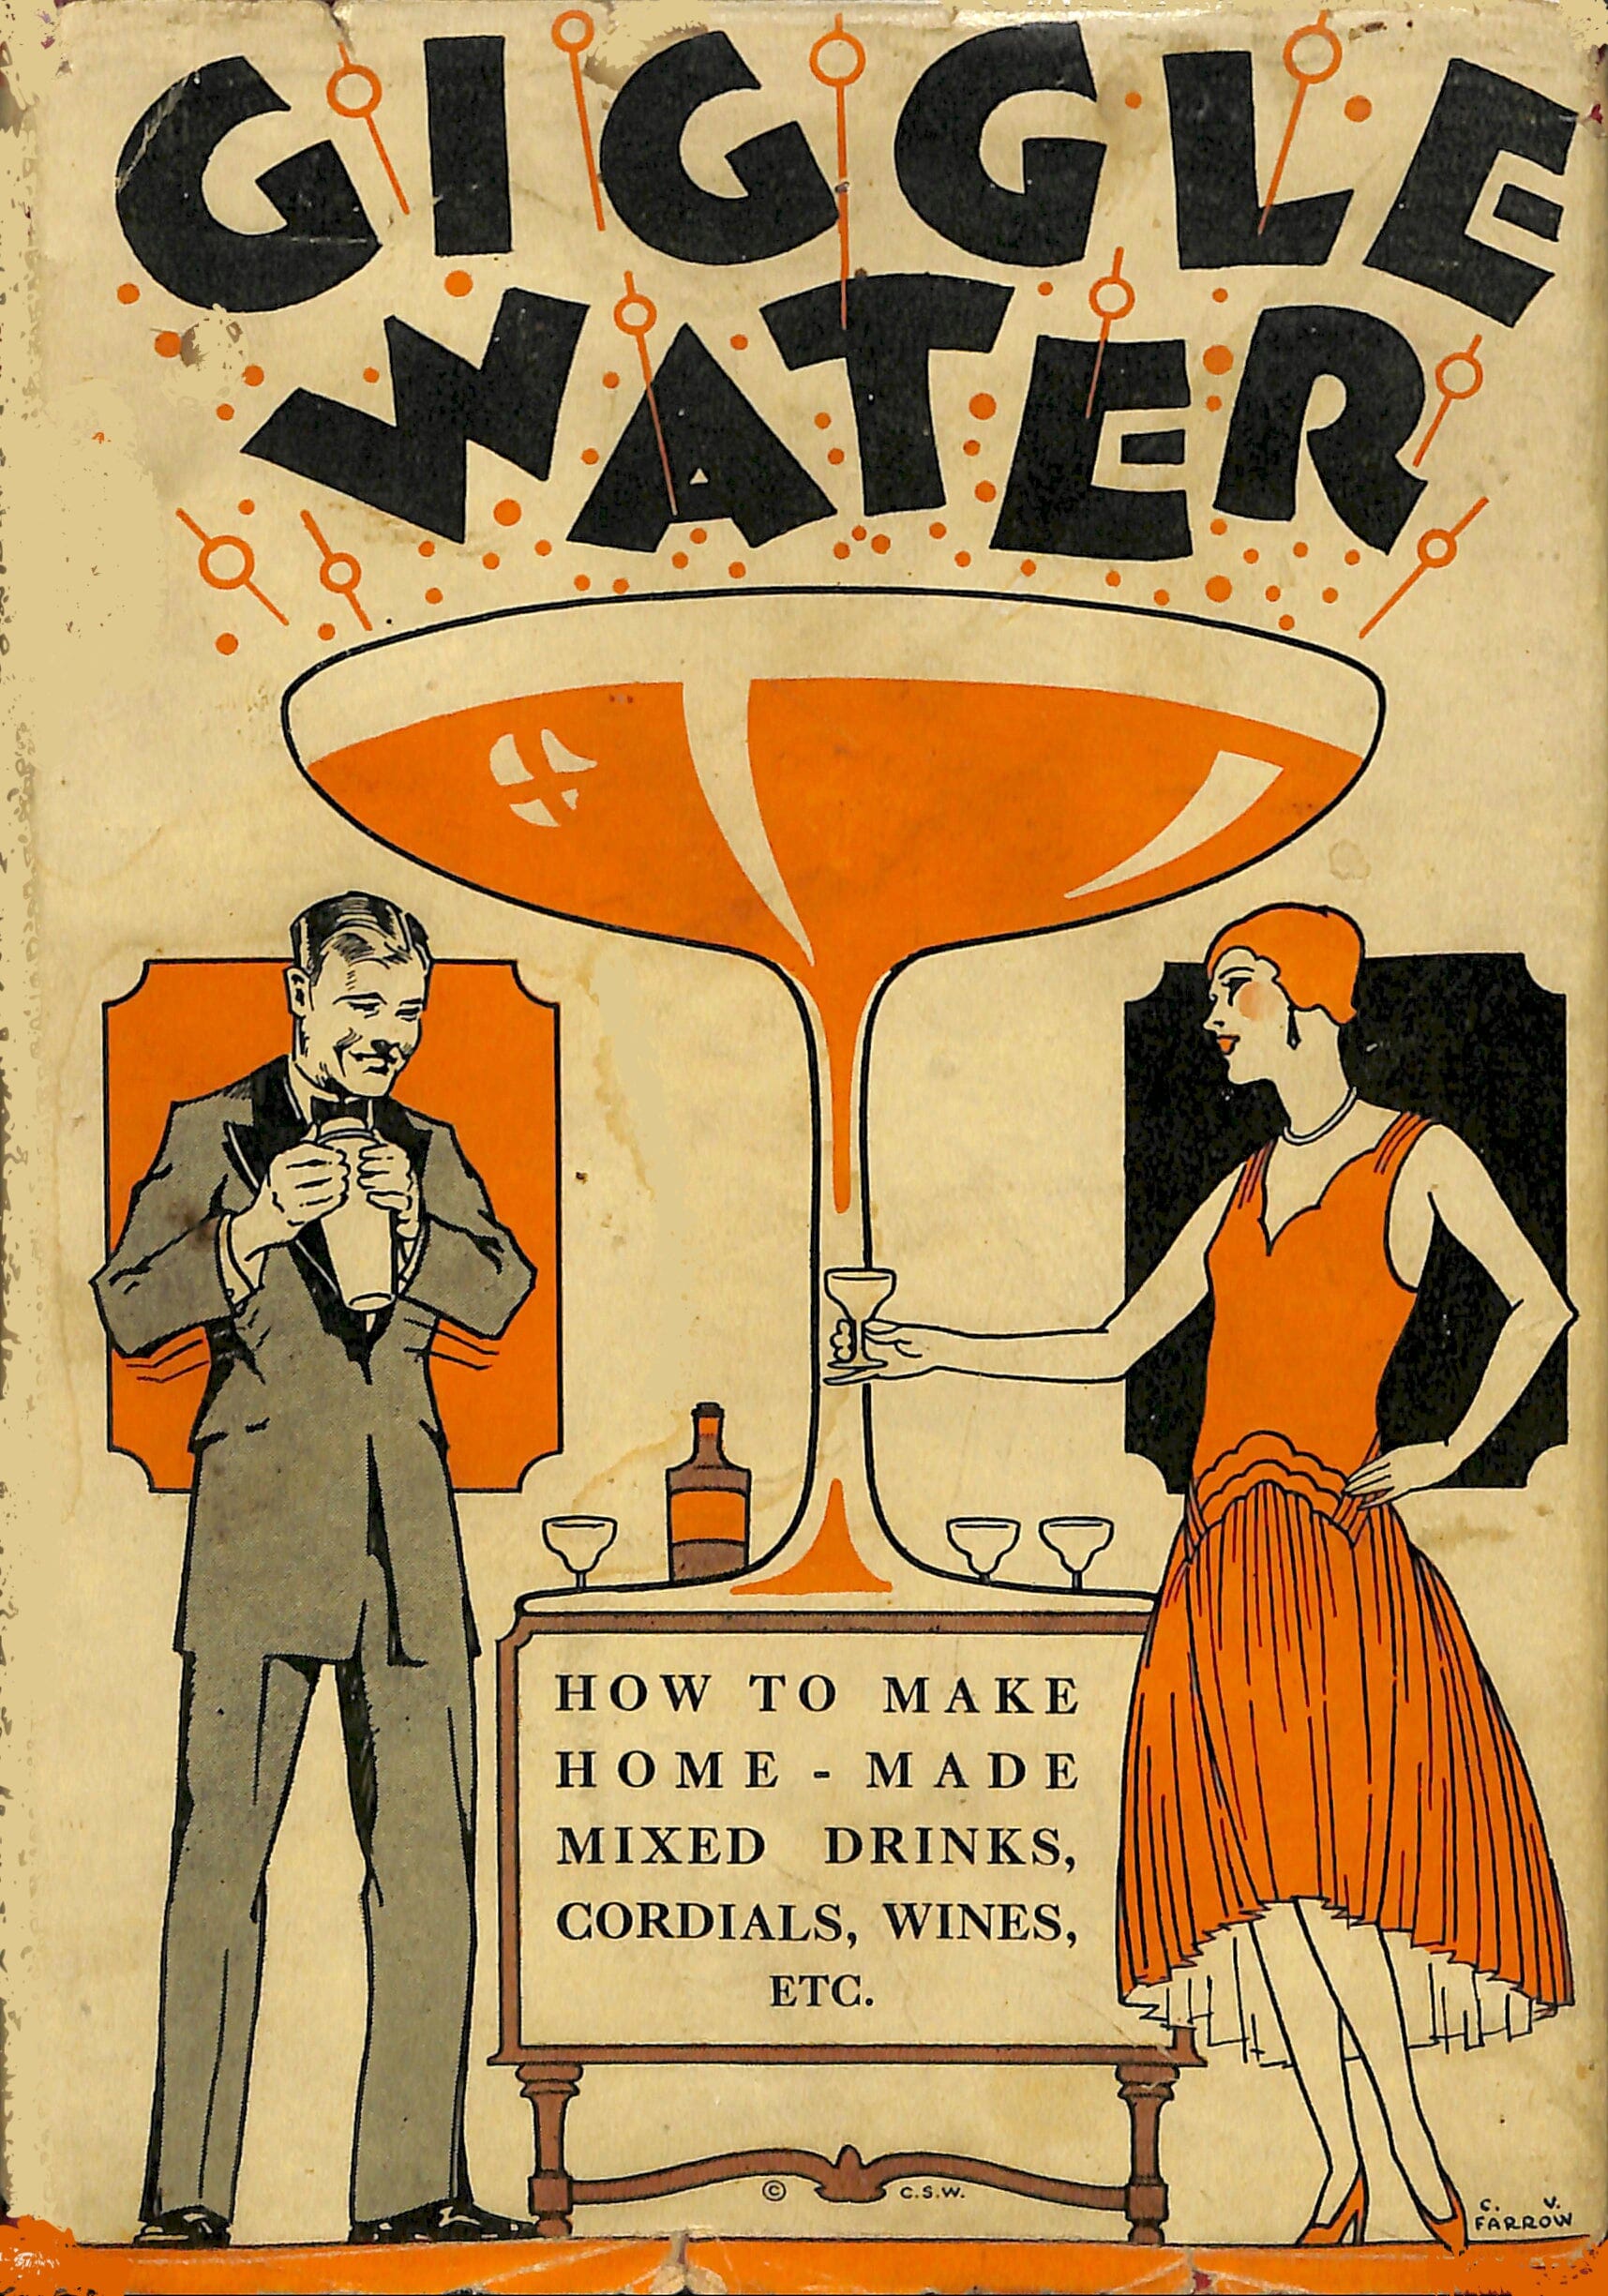 Giggle Water Cocktail Book Cover 1920s  Vintage cocktail posters – The  Trumpet Shop Vintage Prints